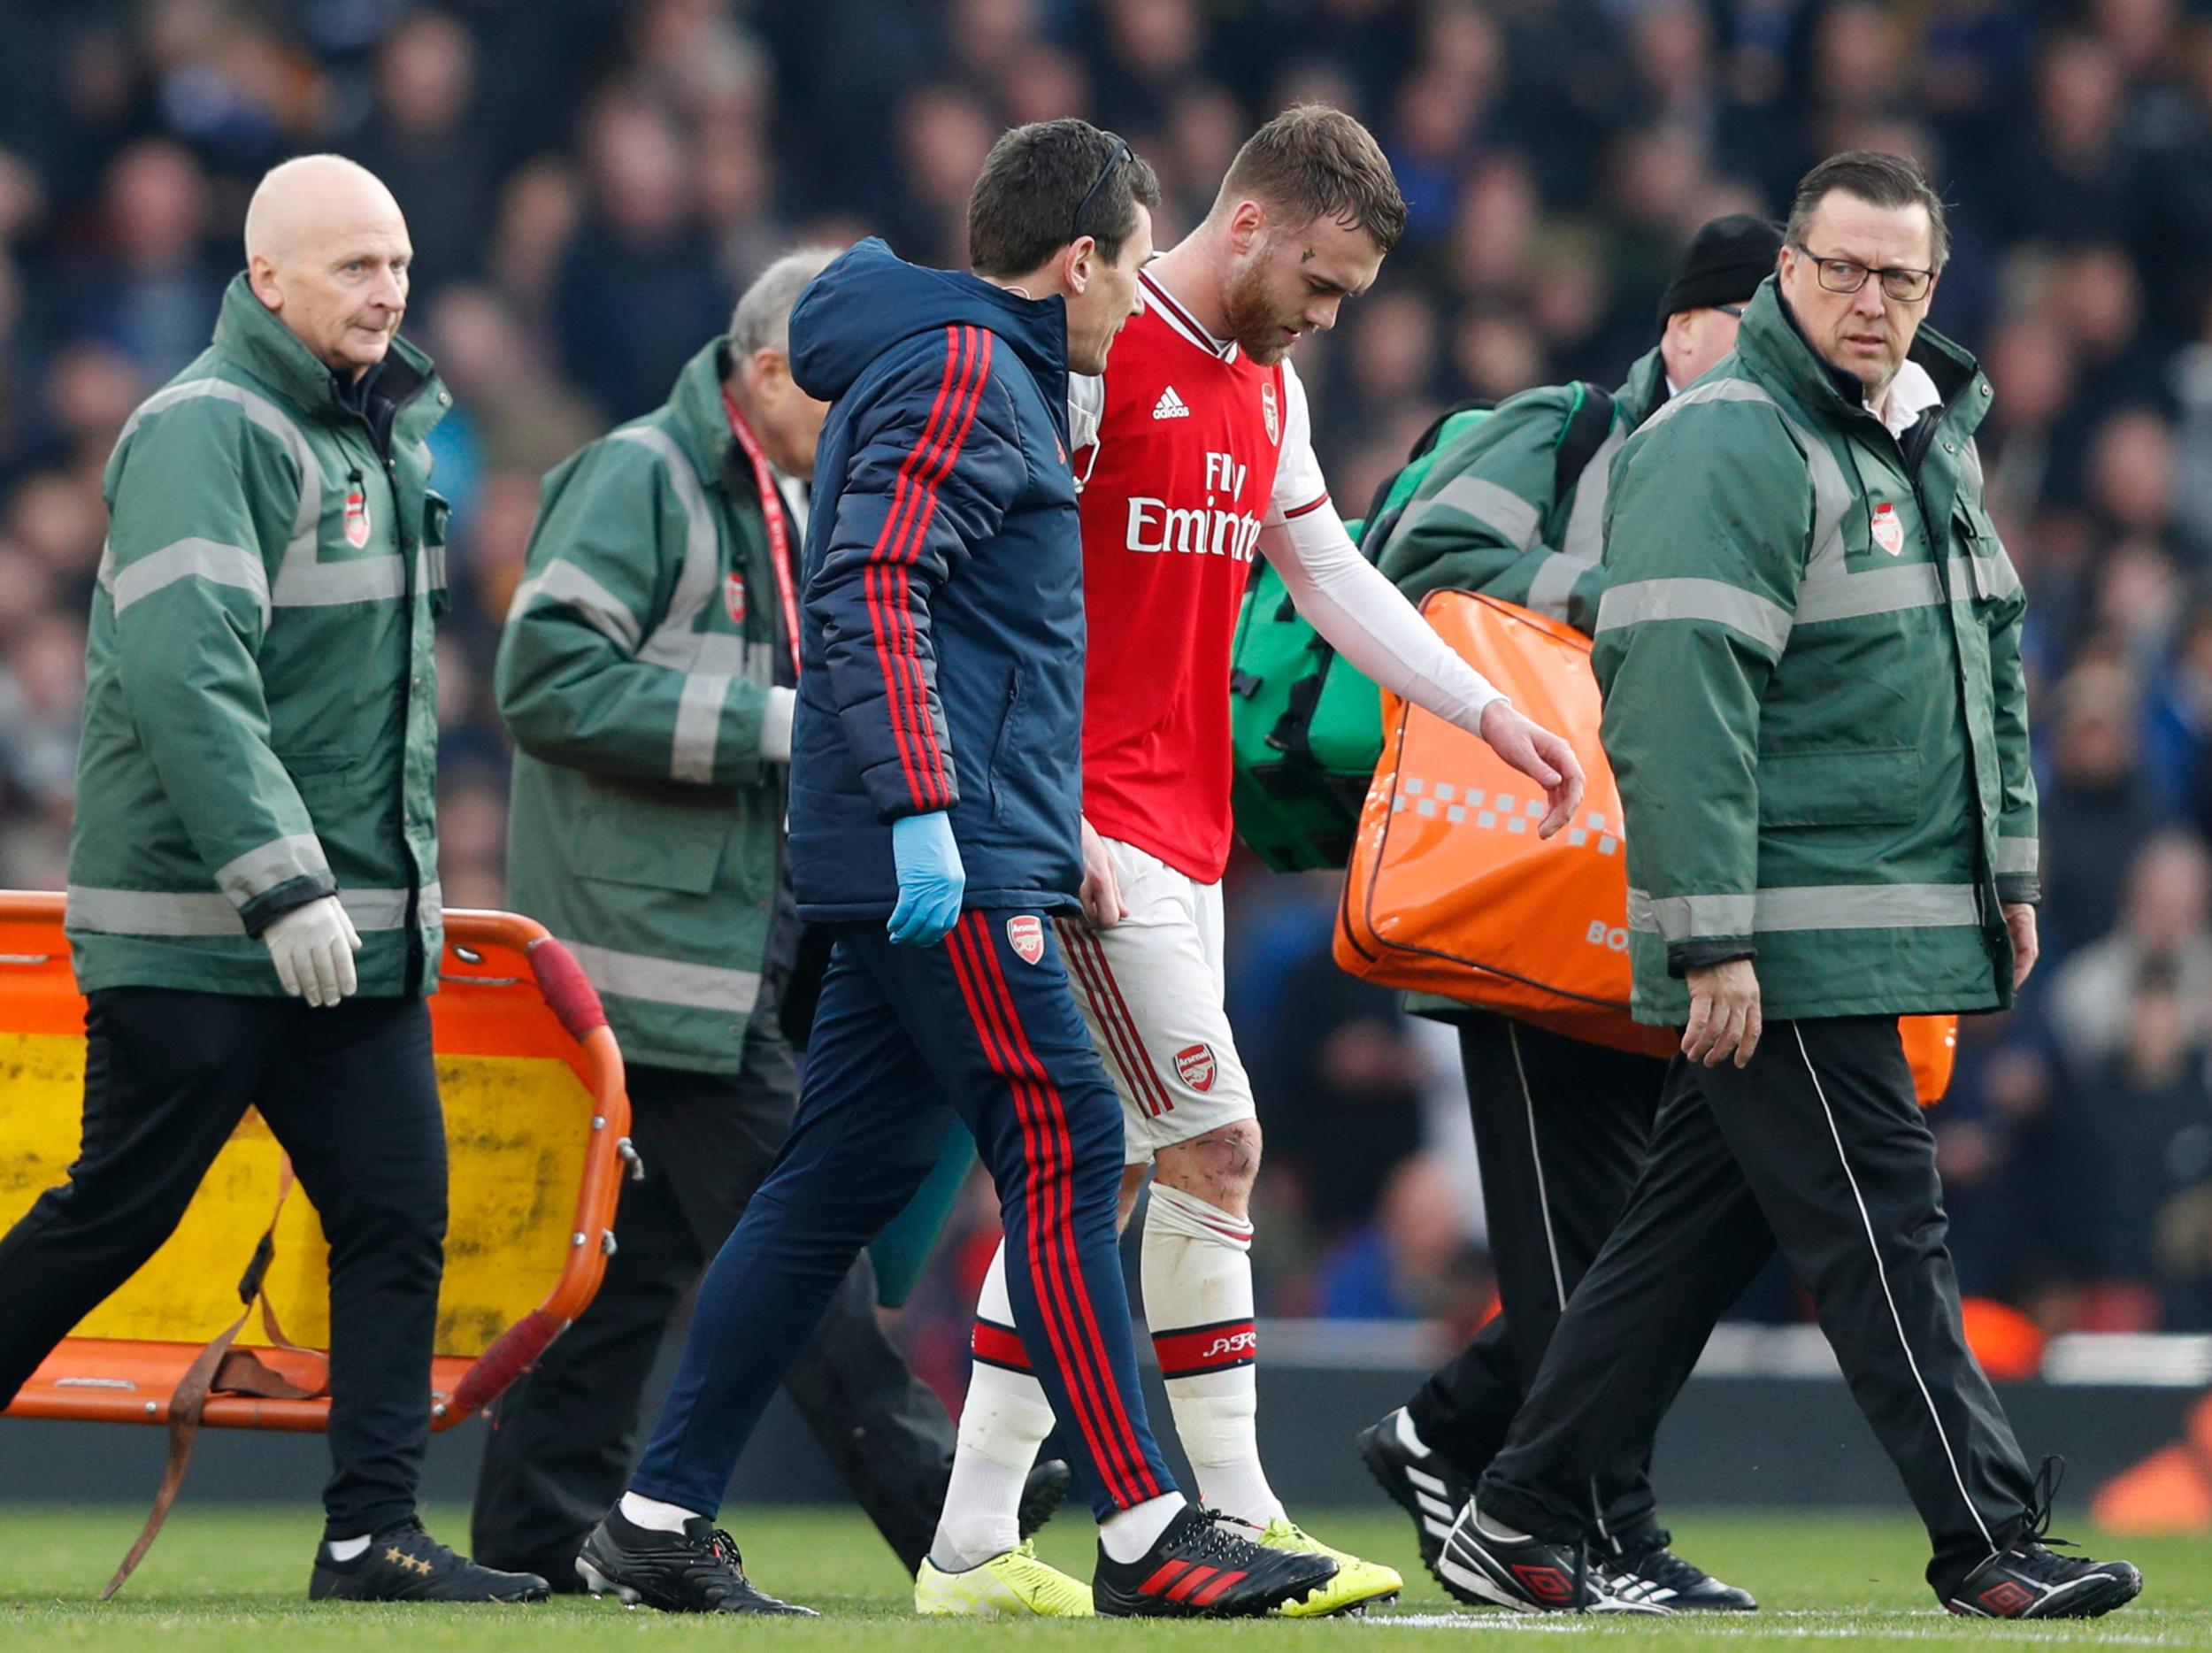 Arsenal defender Calum Chambers 'determined' to come back stronger from serious knee injury